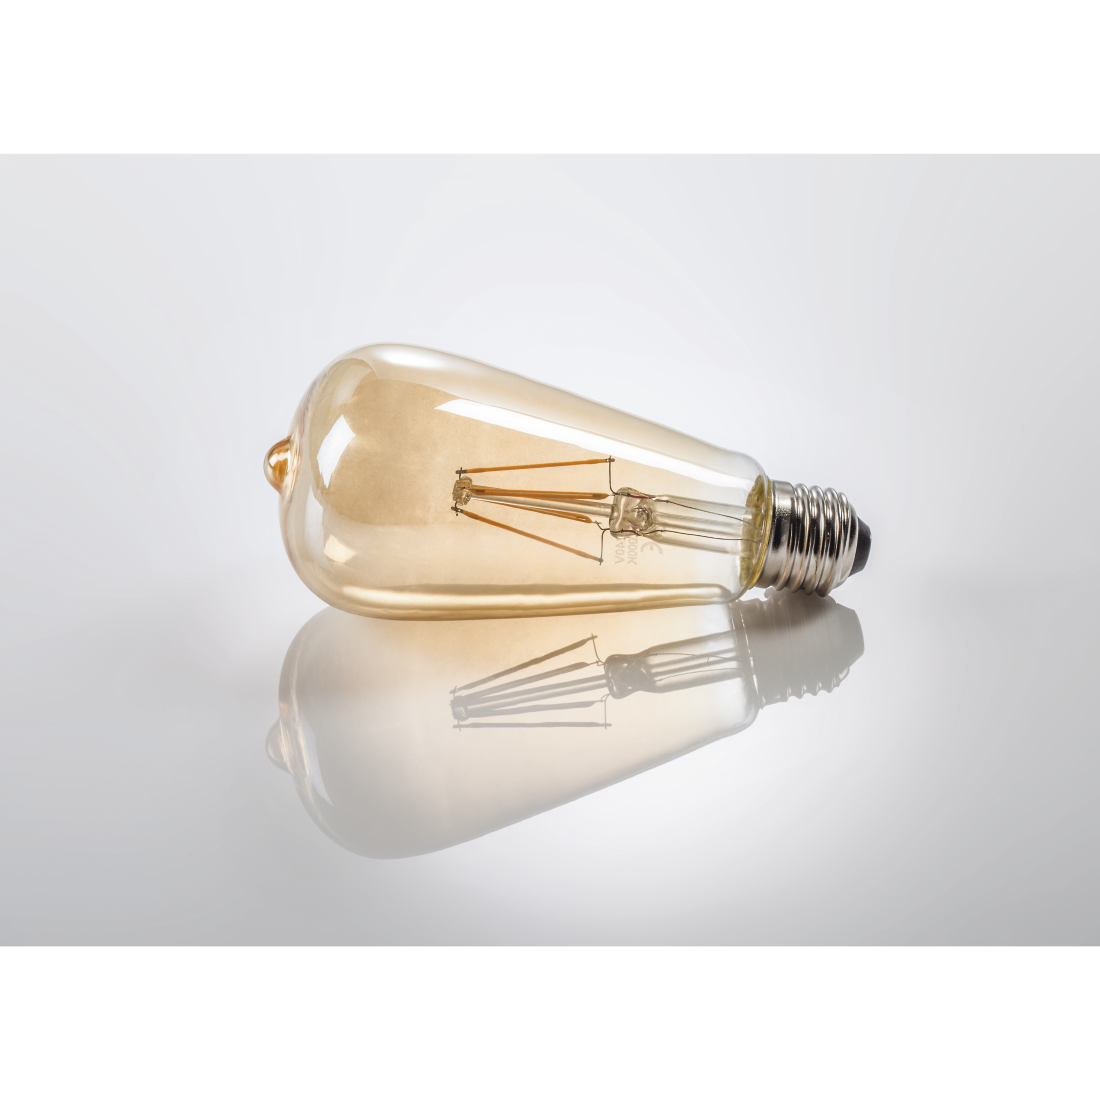 abx3 High-Res Image 3 - Xavax, LED Filament, E27, 410 lm Replaces 36 W, Vintage Bulb, amber, warm white